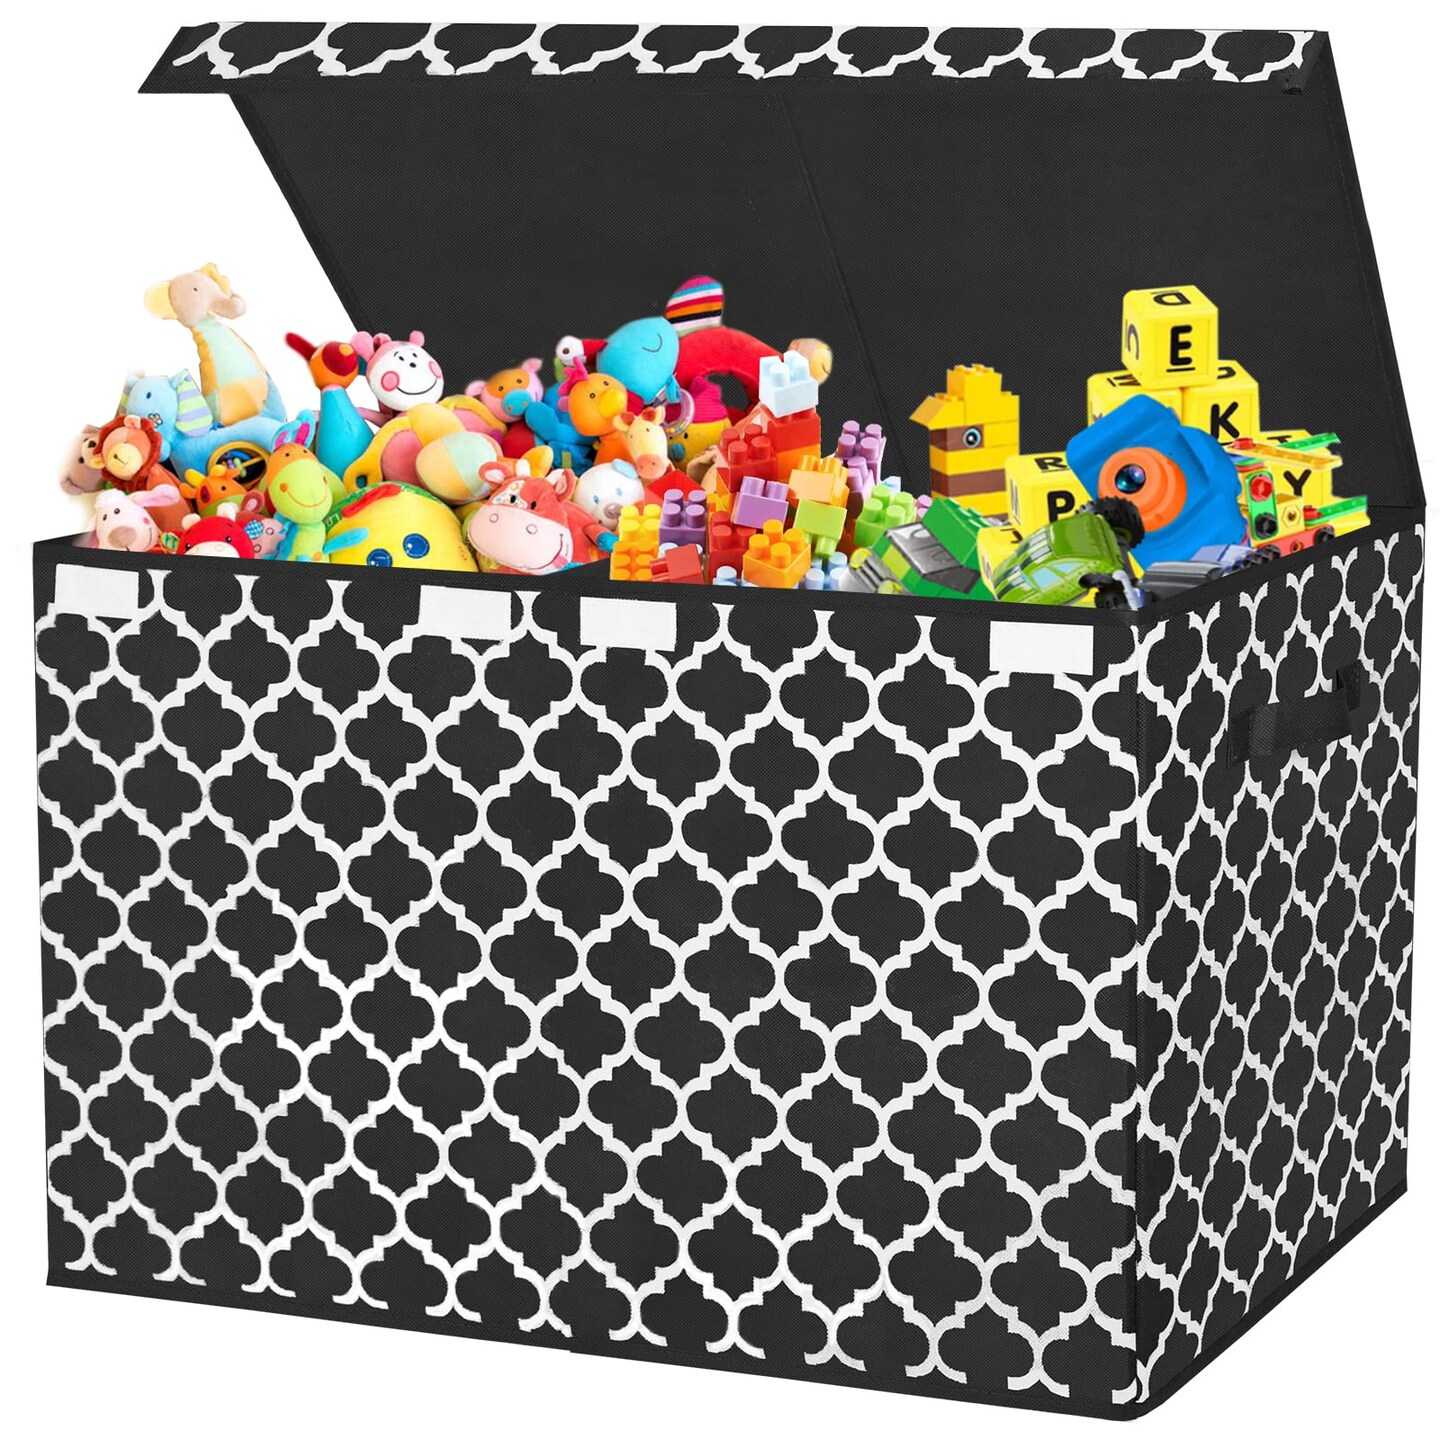 homyfort Large Toy Storage Organizer with Lid and Divider - Durable Toy Box for Boys, Kids, Toddler, Collapsible Toy Chest for Living Room Area, Playroom, Nursery, Black